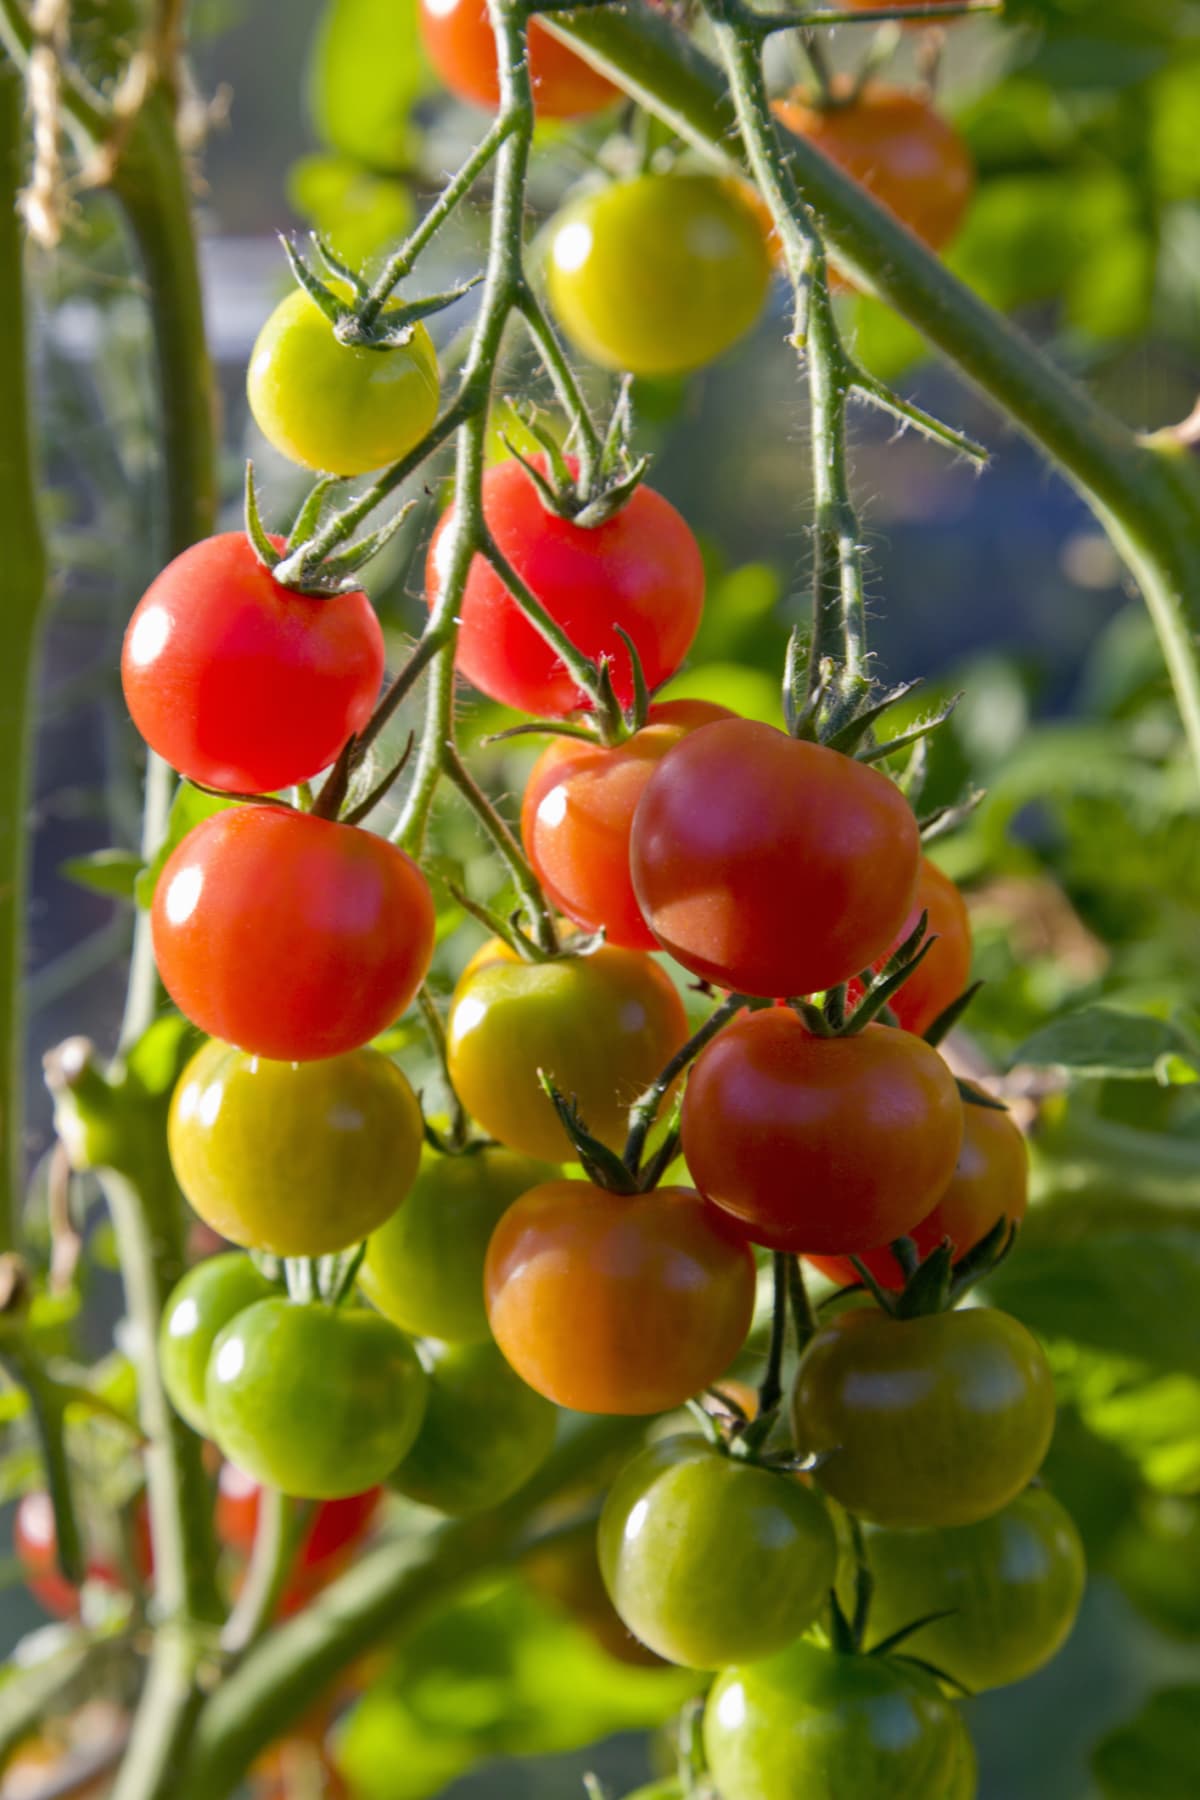 Tomato plant in various stages of ripeness